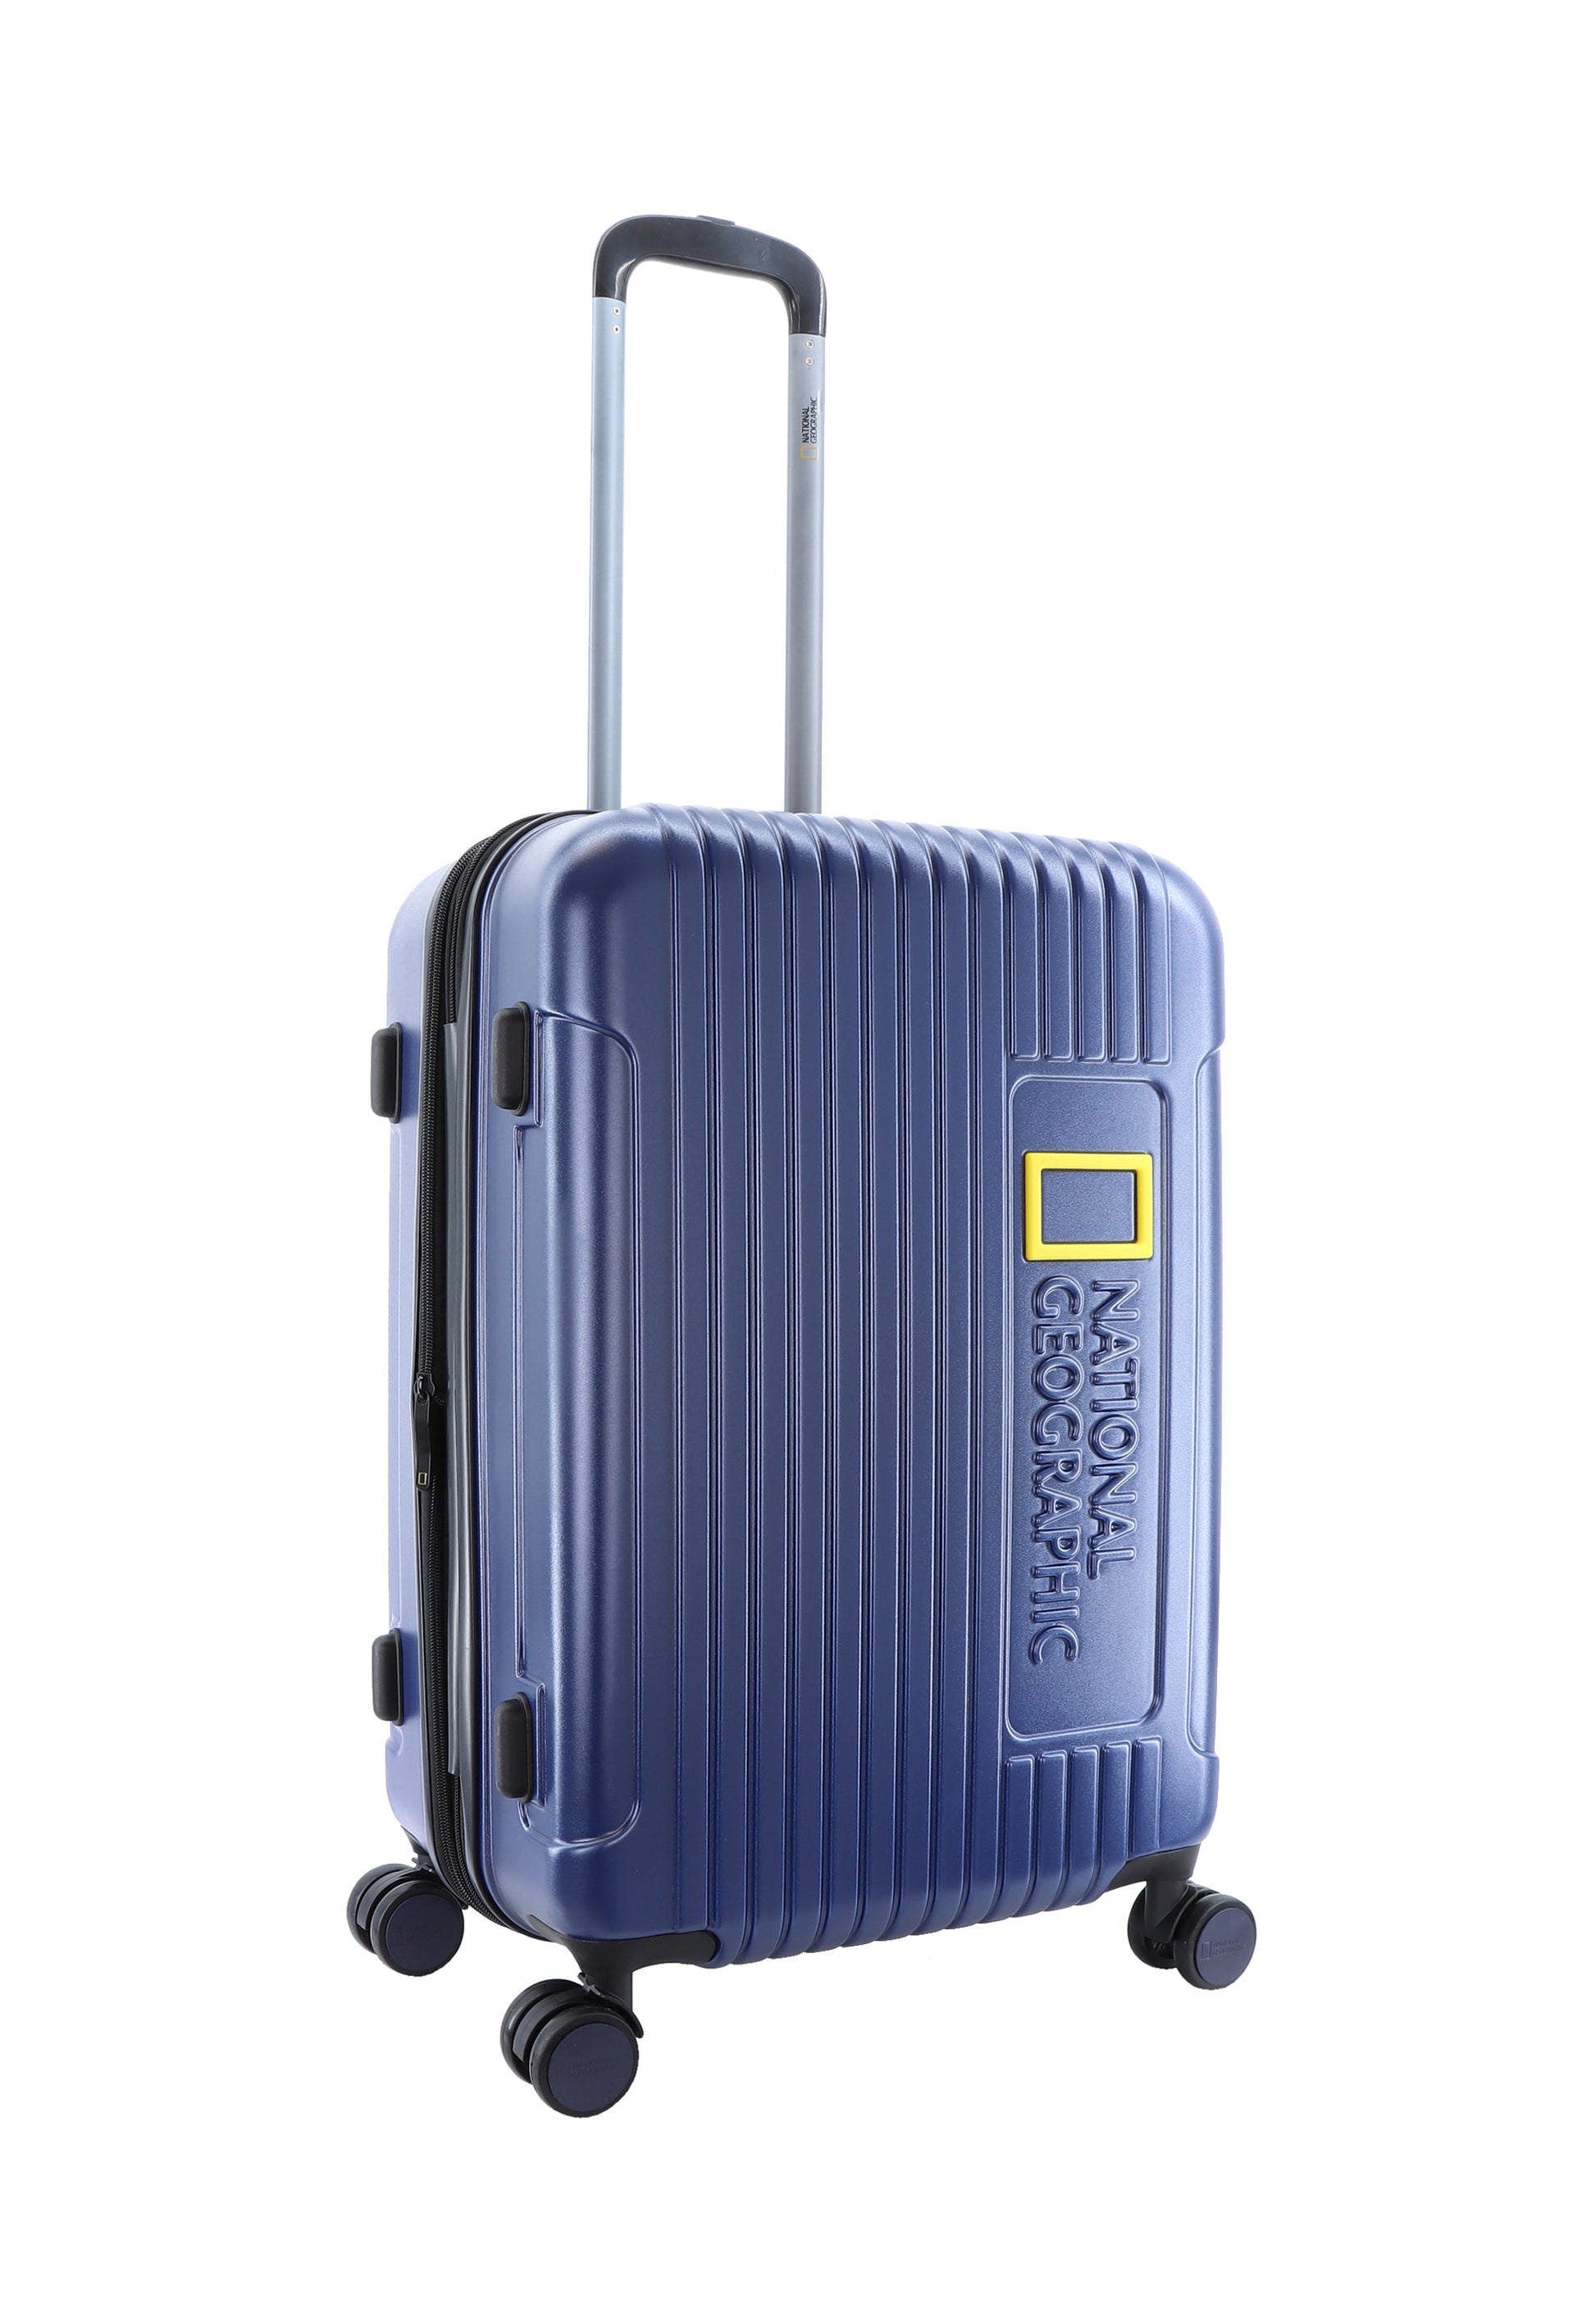 National Geographic Canyon M - Voorkant Blauw hard reiskoffer | luggage4u.be